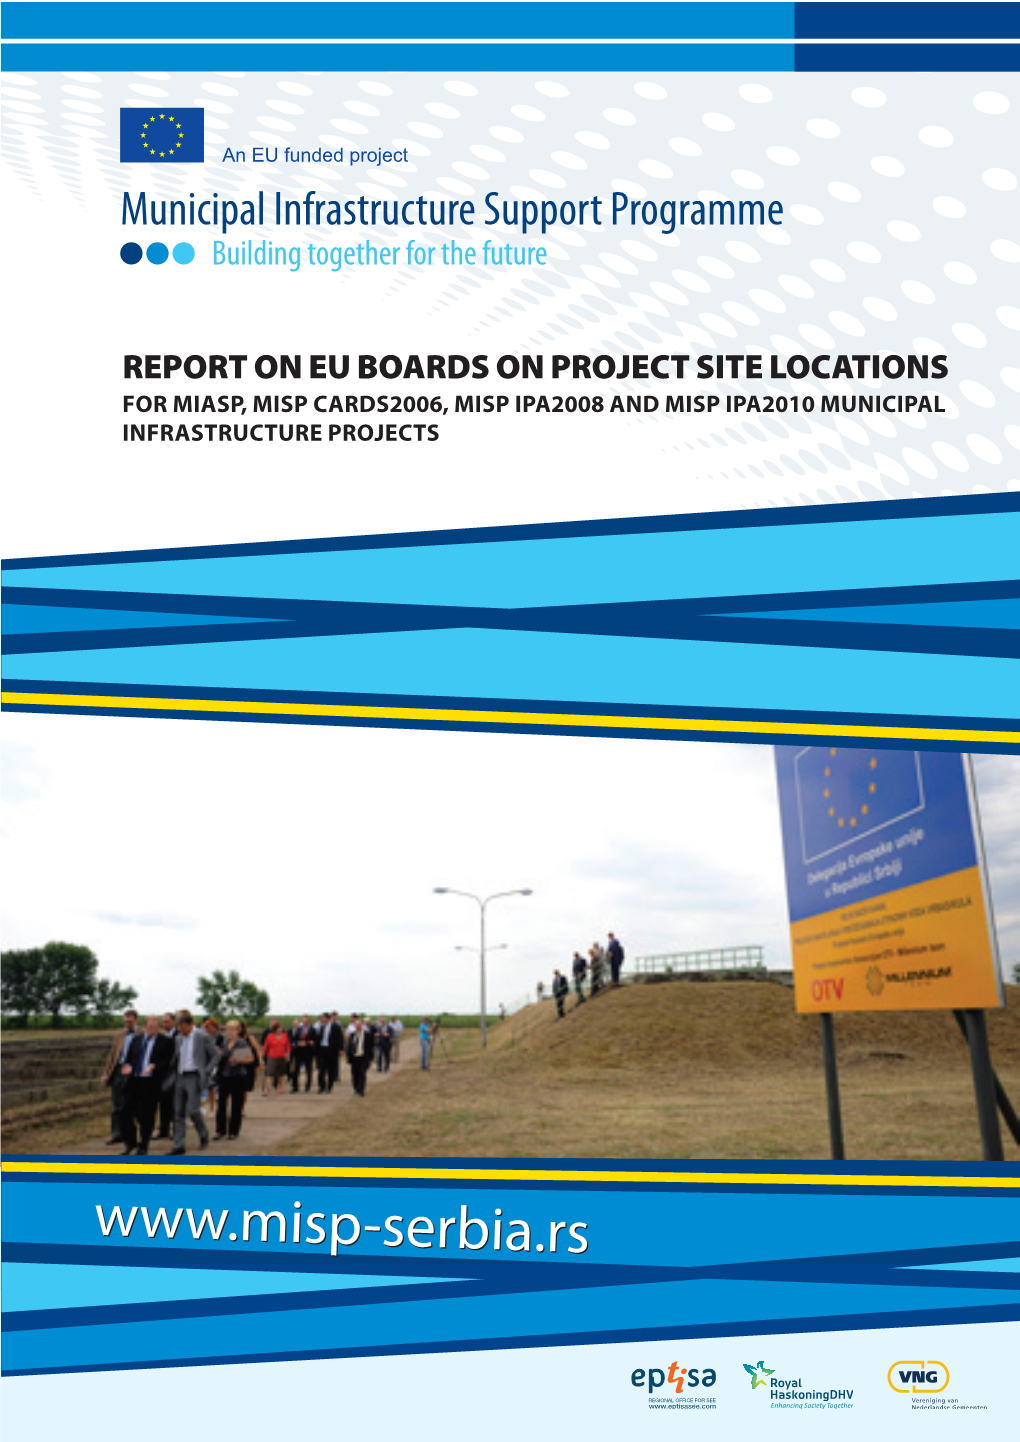 Report on EU Boards on Project Site Locations for MIASP, MISP CARDS2006, MISP IPA2008 and MISP IPA2010 Municipal Infrastructure Projects